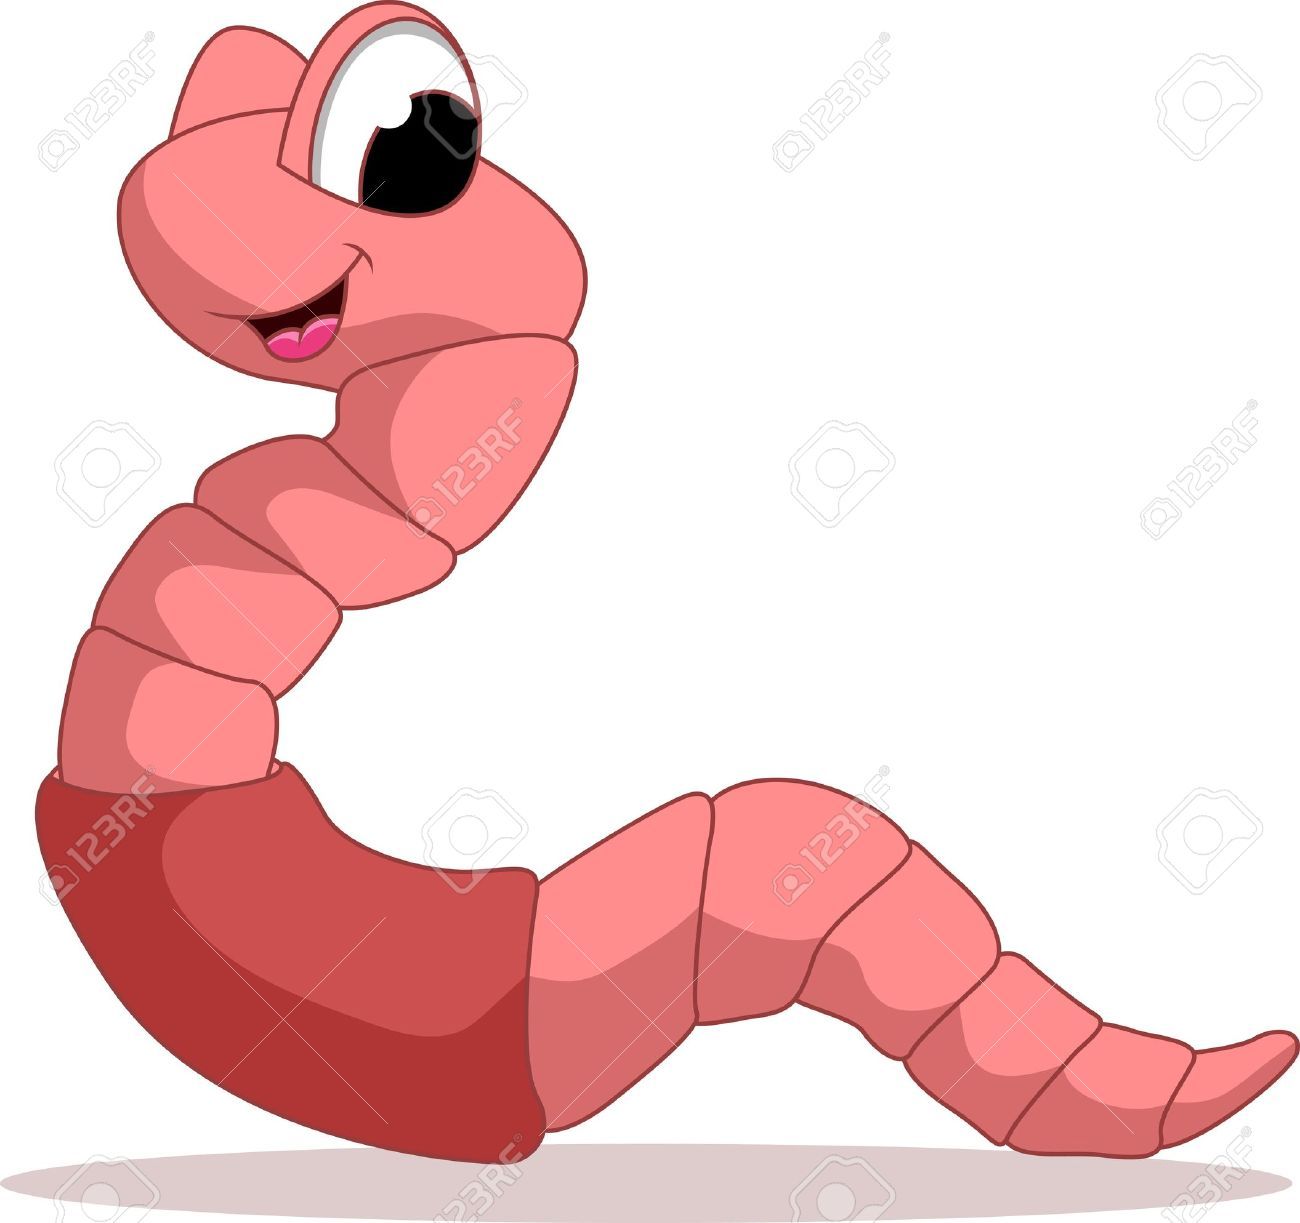 Earthworm Stock Vector Illustration And Royalty Free